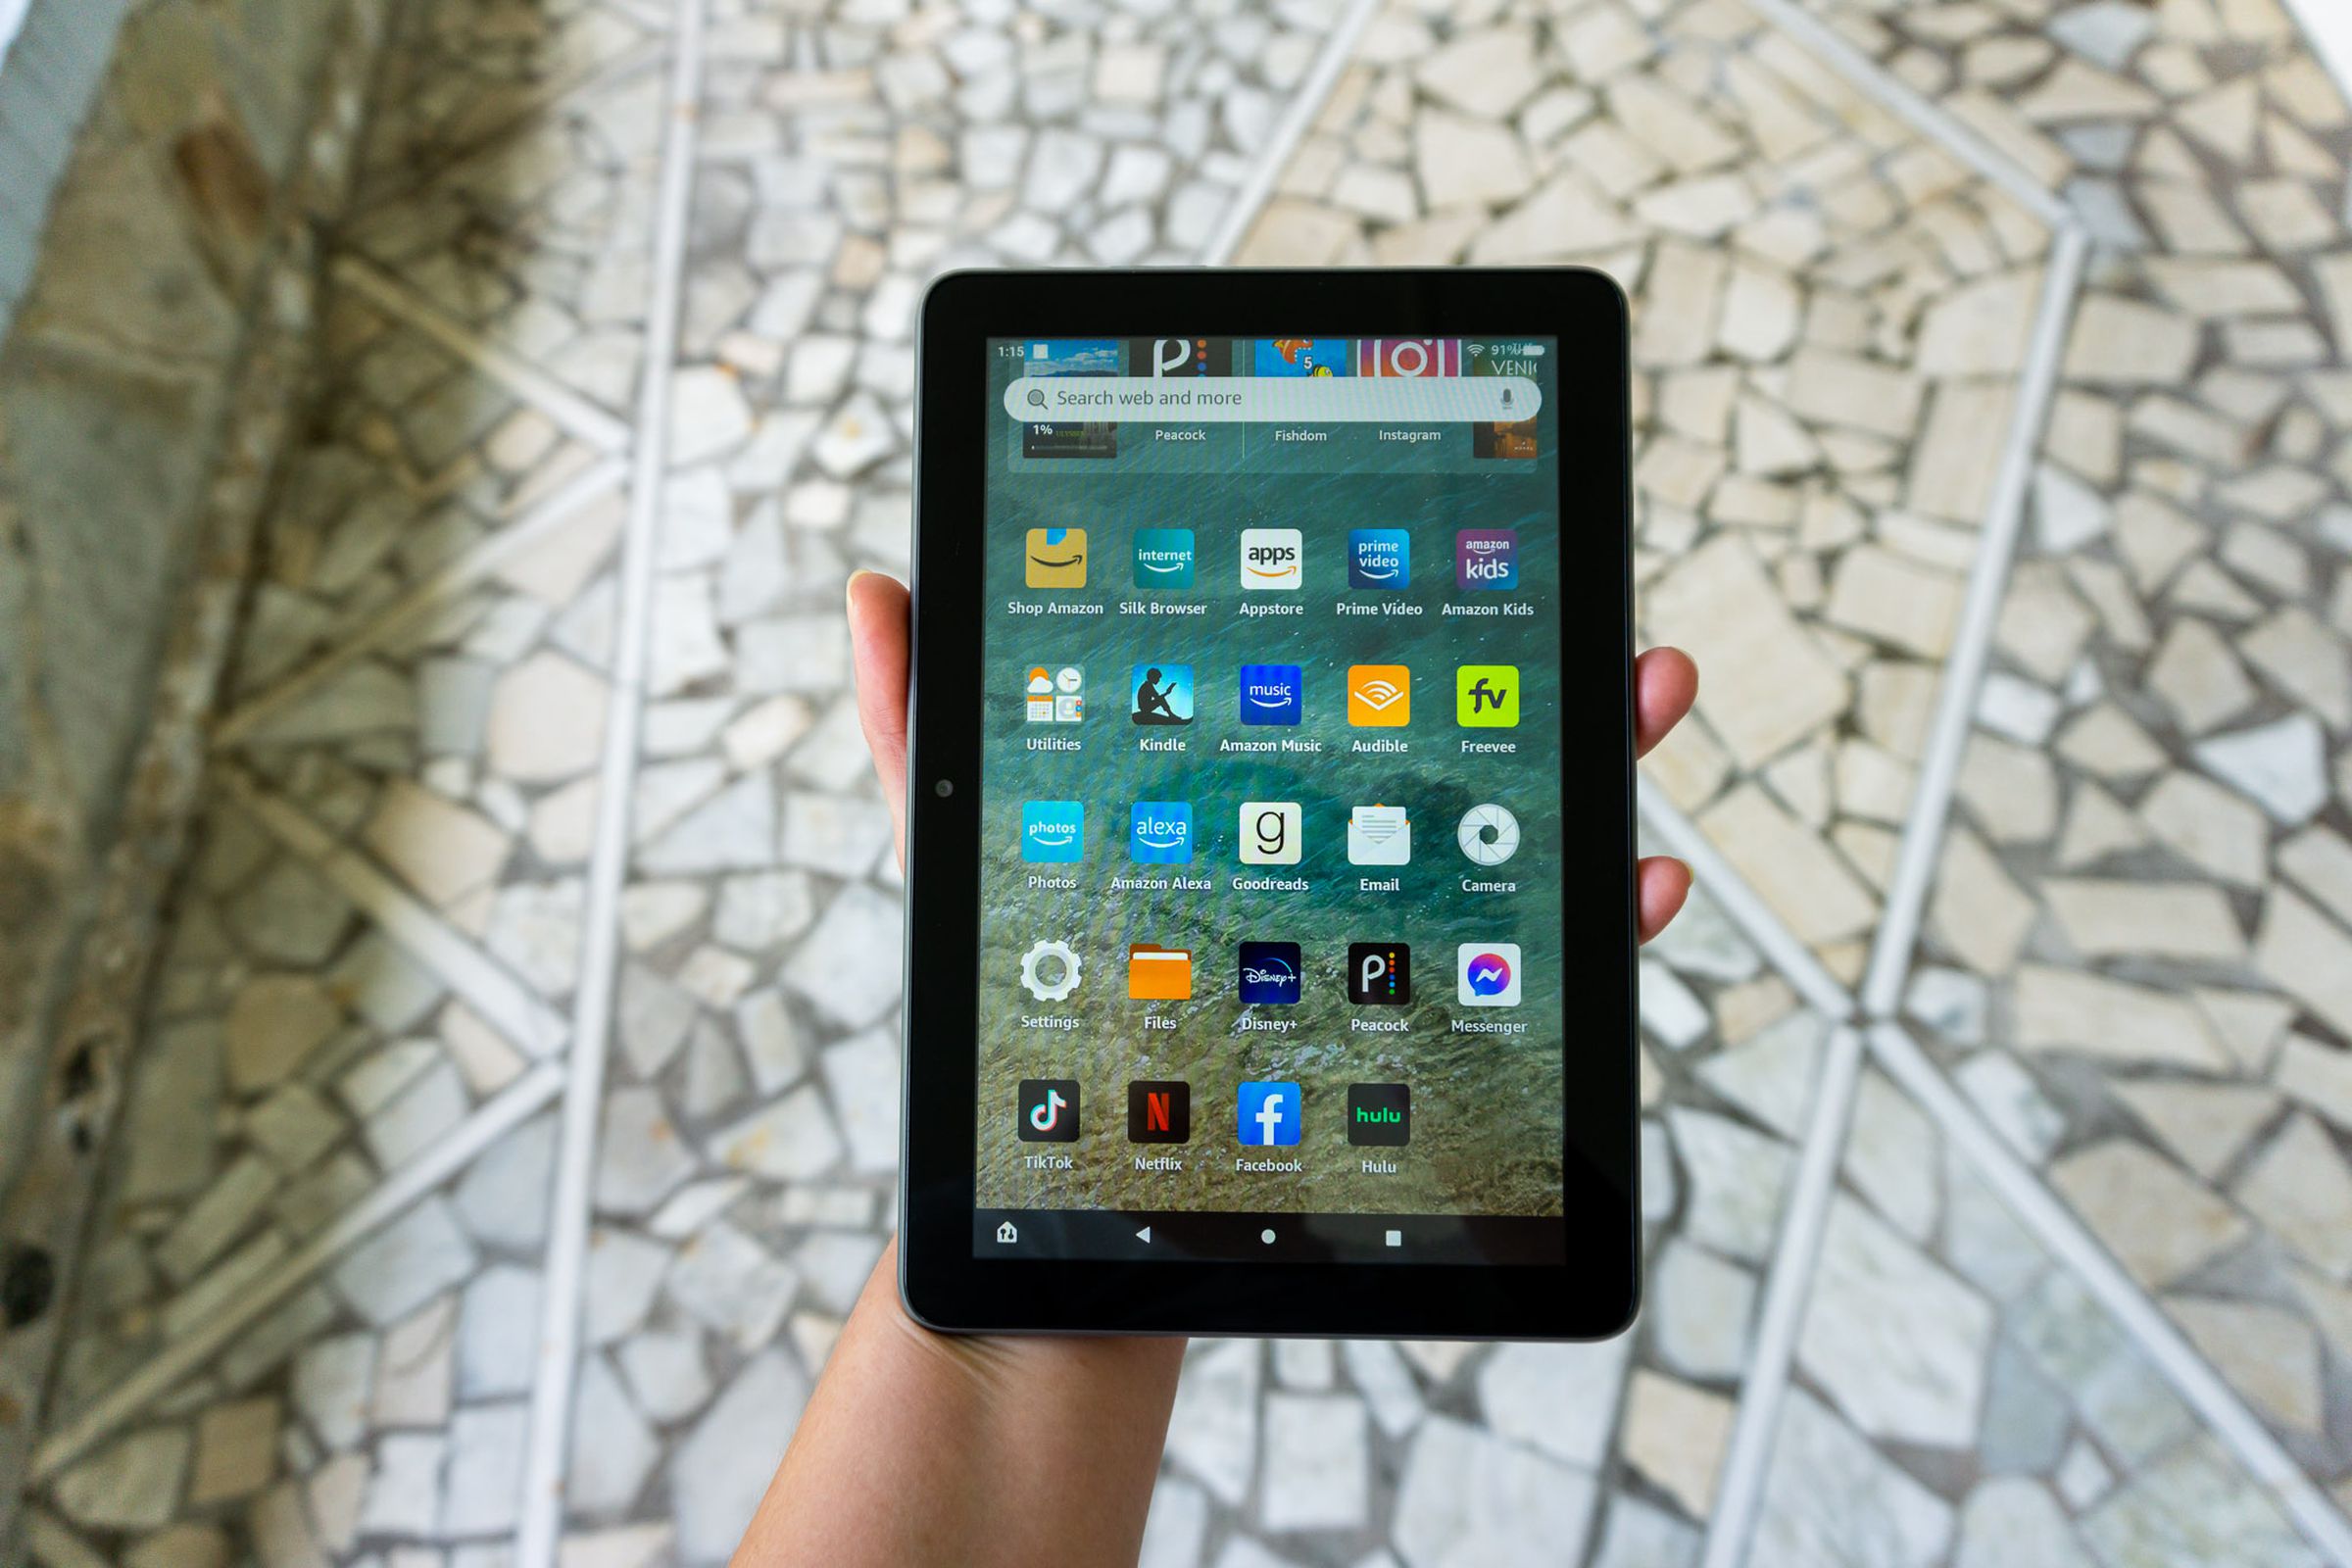 A person holding the Amazon Fire HD 8 Plus tablet